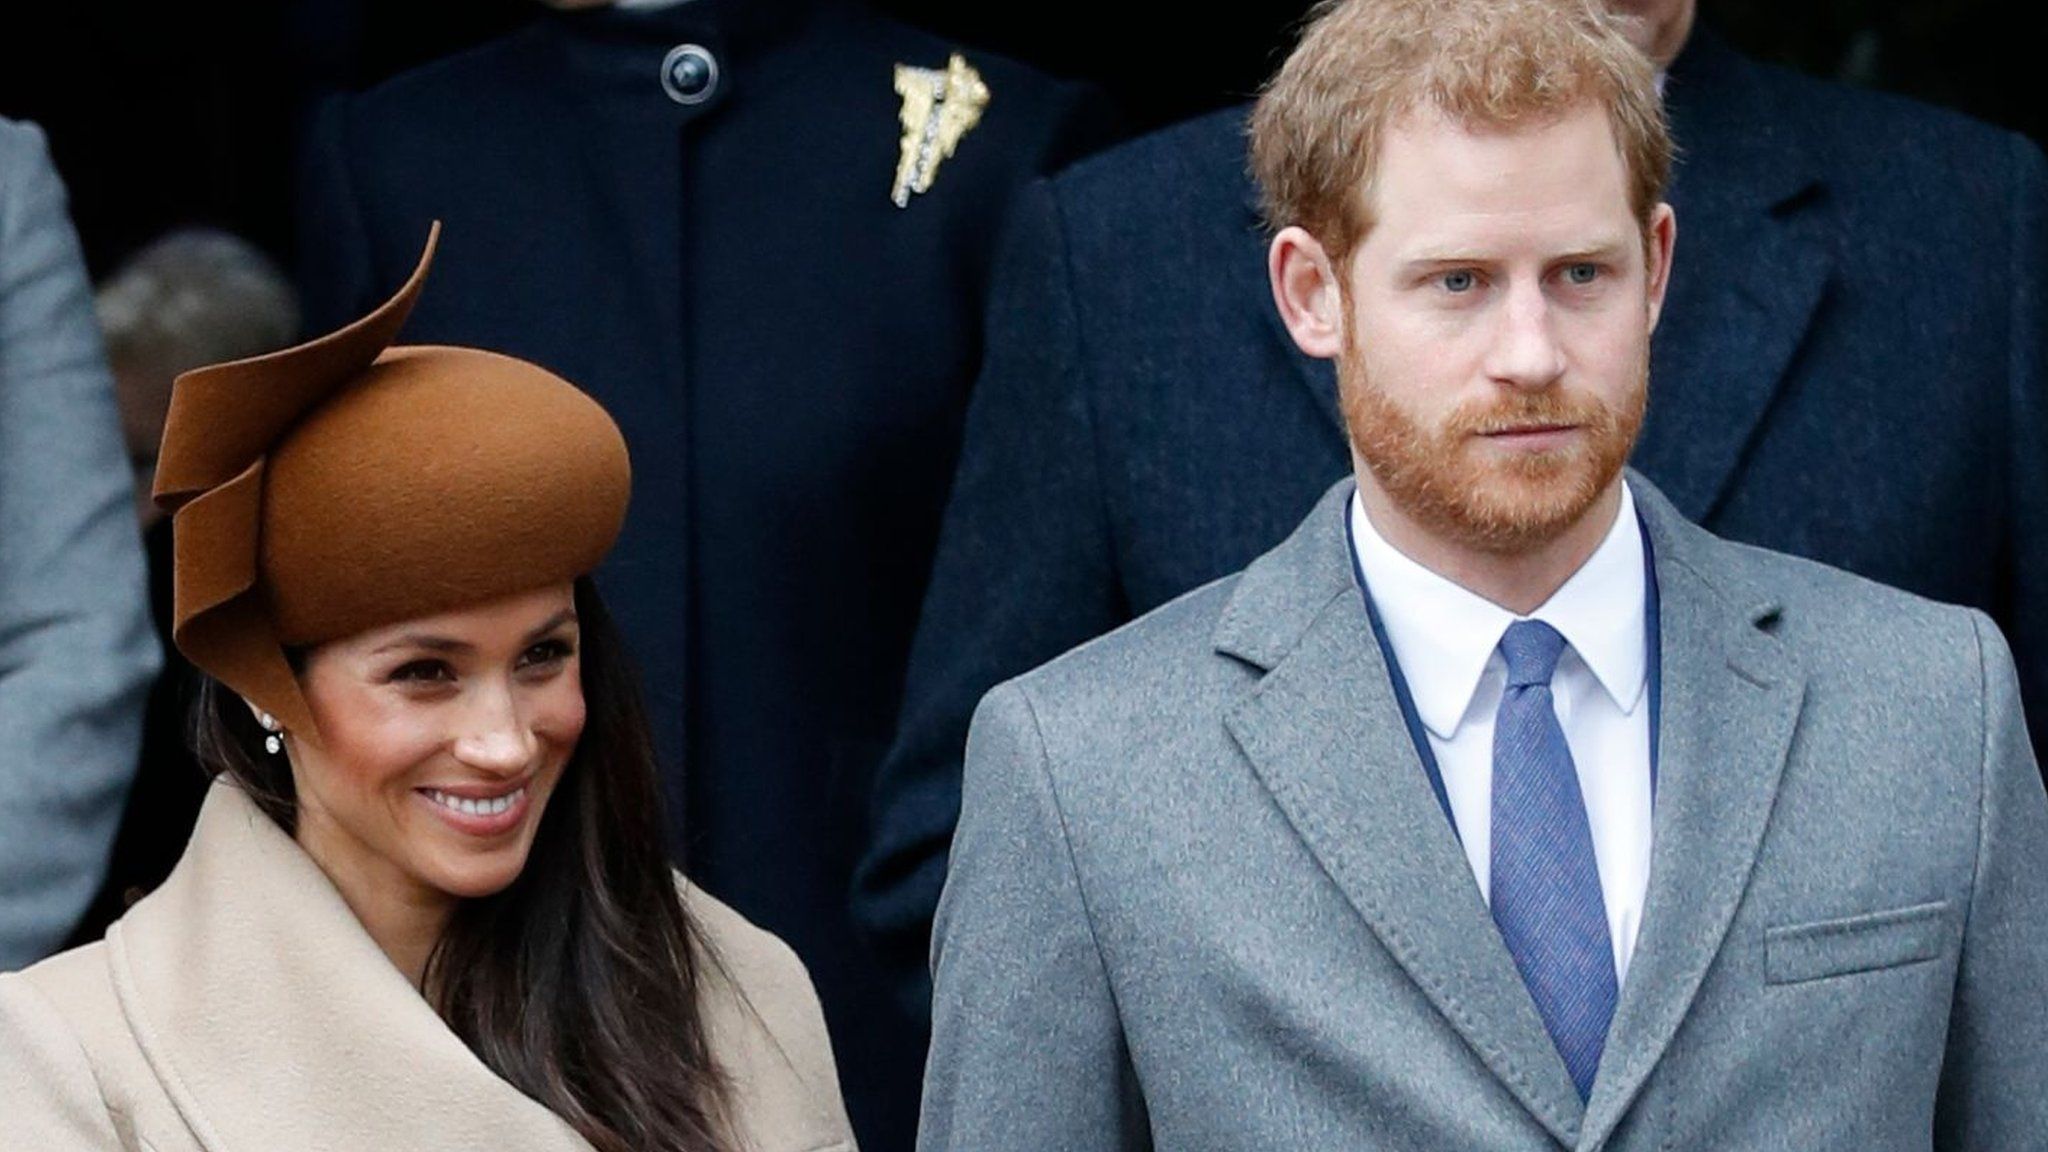 Meghan Markle and Prince Harry at Sandringham service on Christmas Day